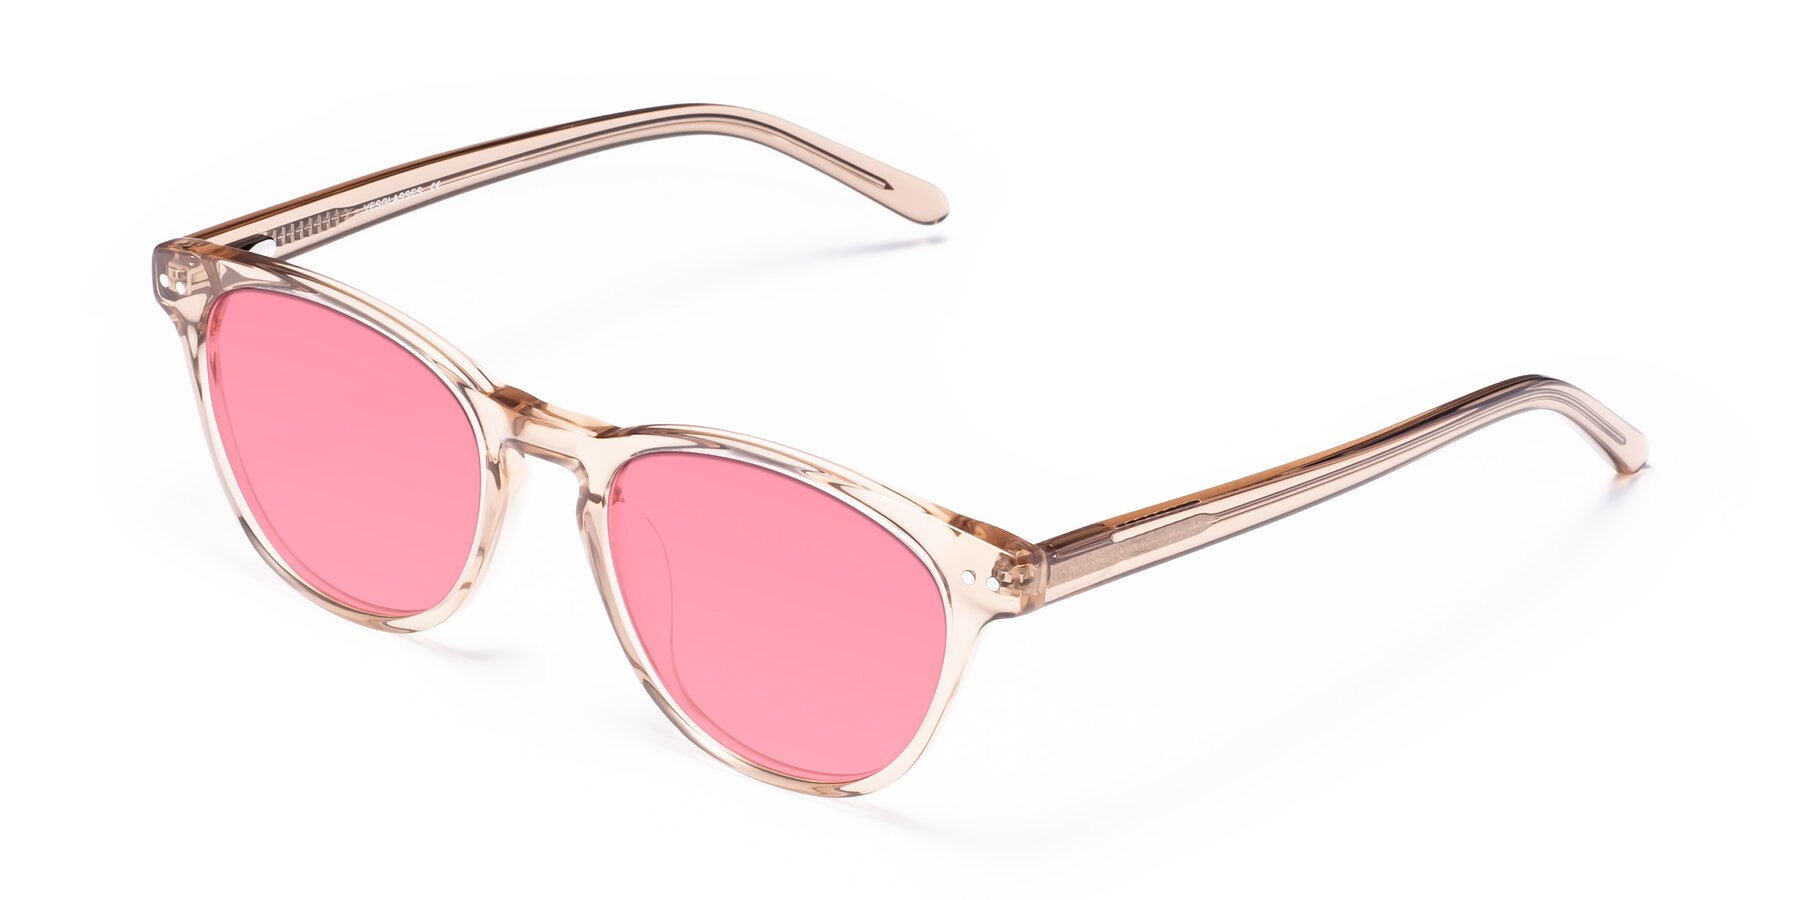 Angle of Blaze in light Brown with Pink Tinted Lenses